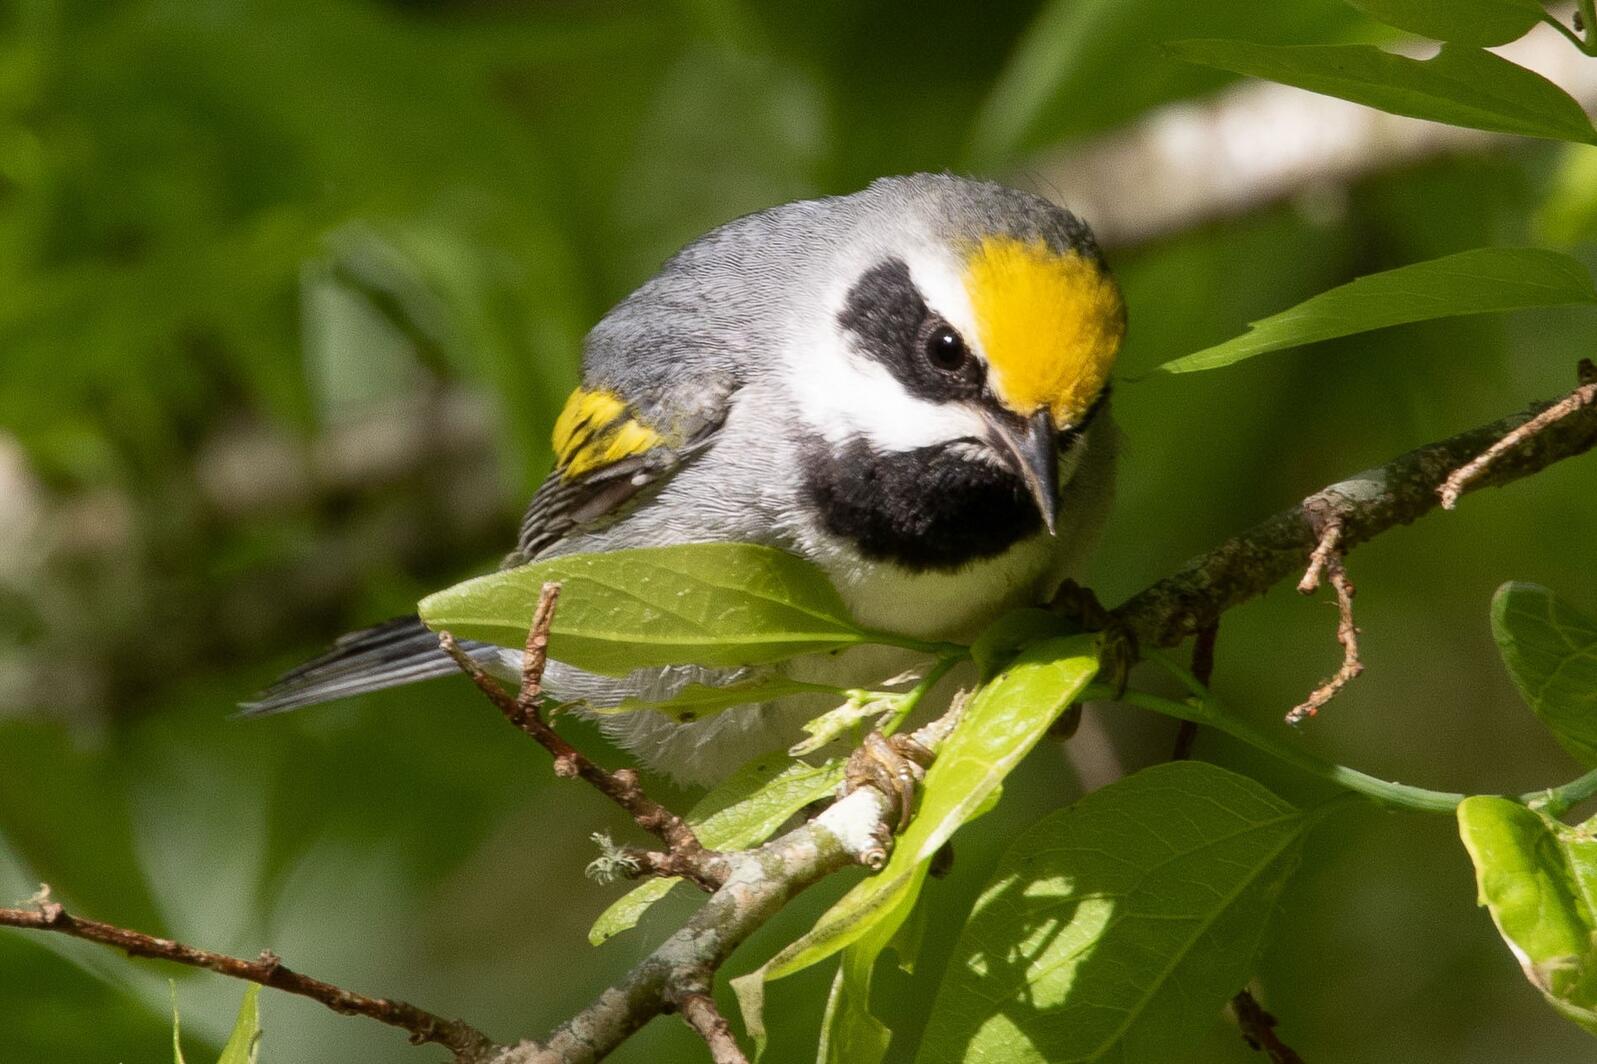 A small white bird with a yellow forehead peers closely at a green leaf.